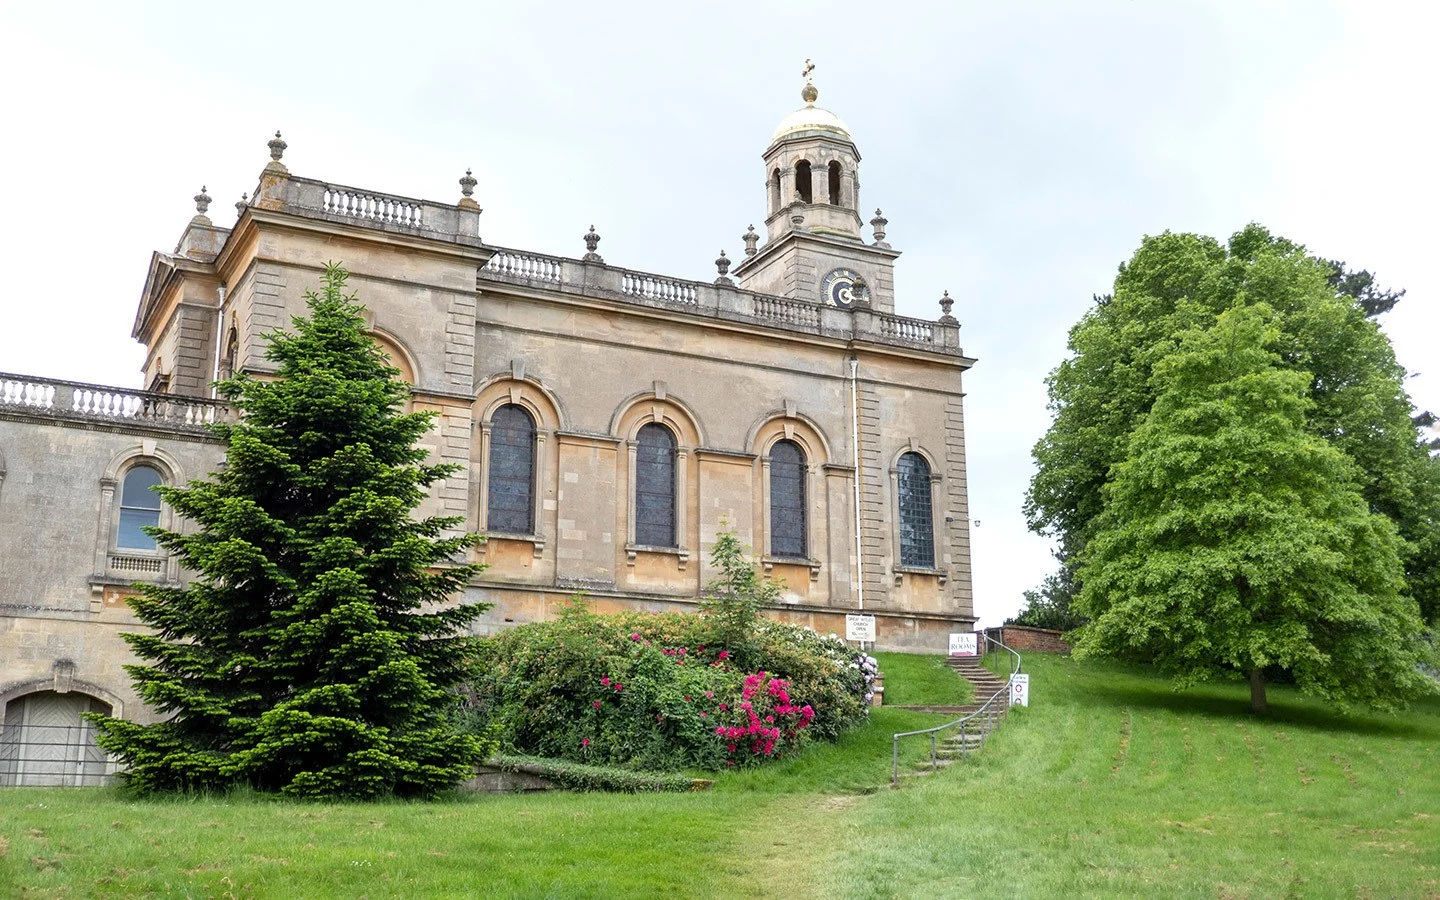 The exterior of Great Witley Church in Worcestershire